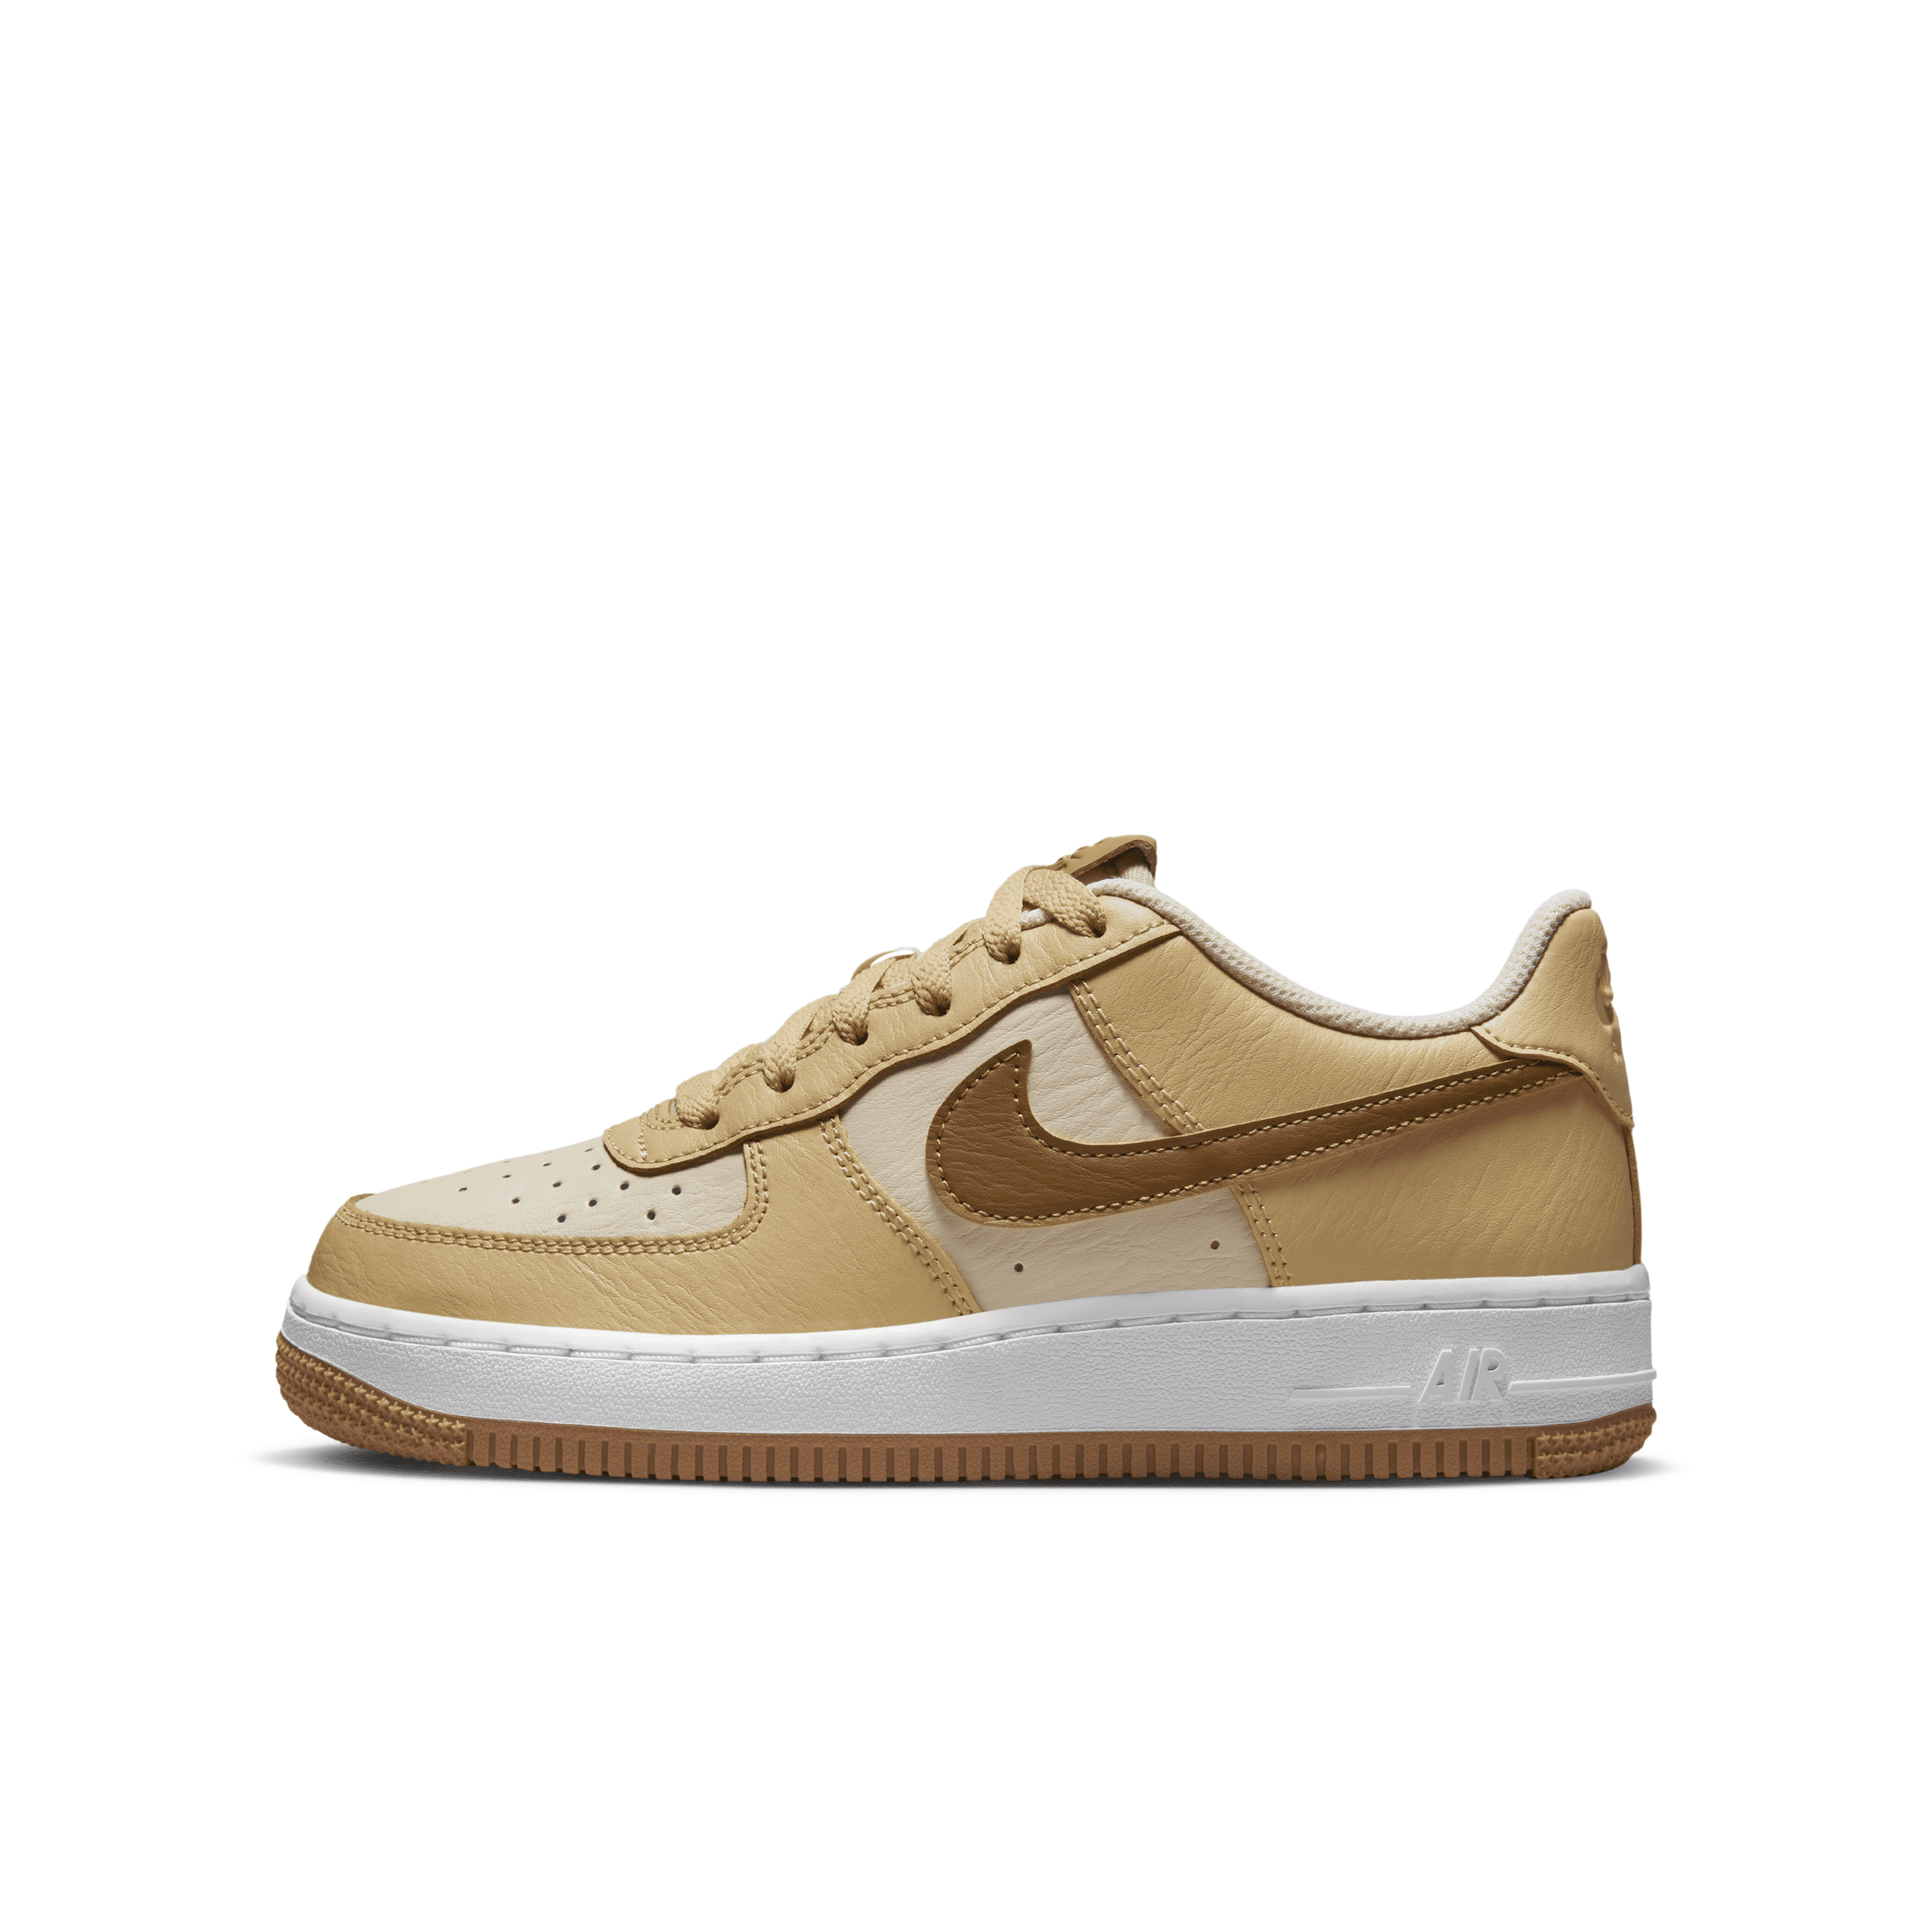 Icon. Legend. What else? Too many words can describe the Nike Air Force 1. Originally an all-star on the basketball court, this sneaker is now a superstar in streetwear. Its durable leather and Air cushioning give the classic look and feel that still makes it a favourite today. Heritage Style::Real and synthetic leather combines for durability and support—just like old-school basketball shoes of the past.,All About Air::A hidden Air unit under the heel provides cushioning like the original AF-1 first introduced in 1982.,Ground Control::The rubber outsole provides durable traction. The iconic circular tread pattern was originally designed to help basketball players pivot on the court. Product Details::Classic laces